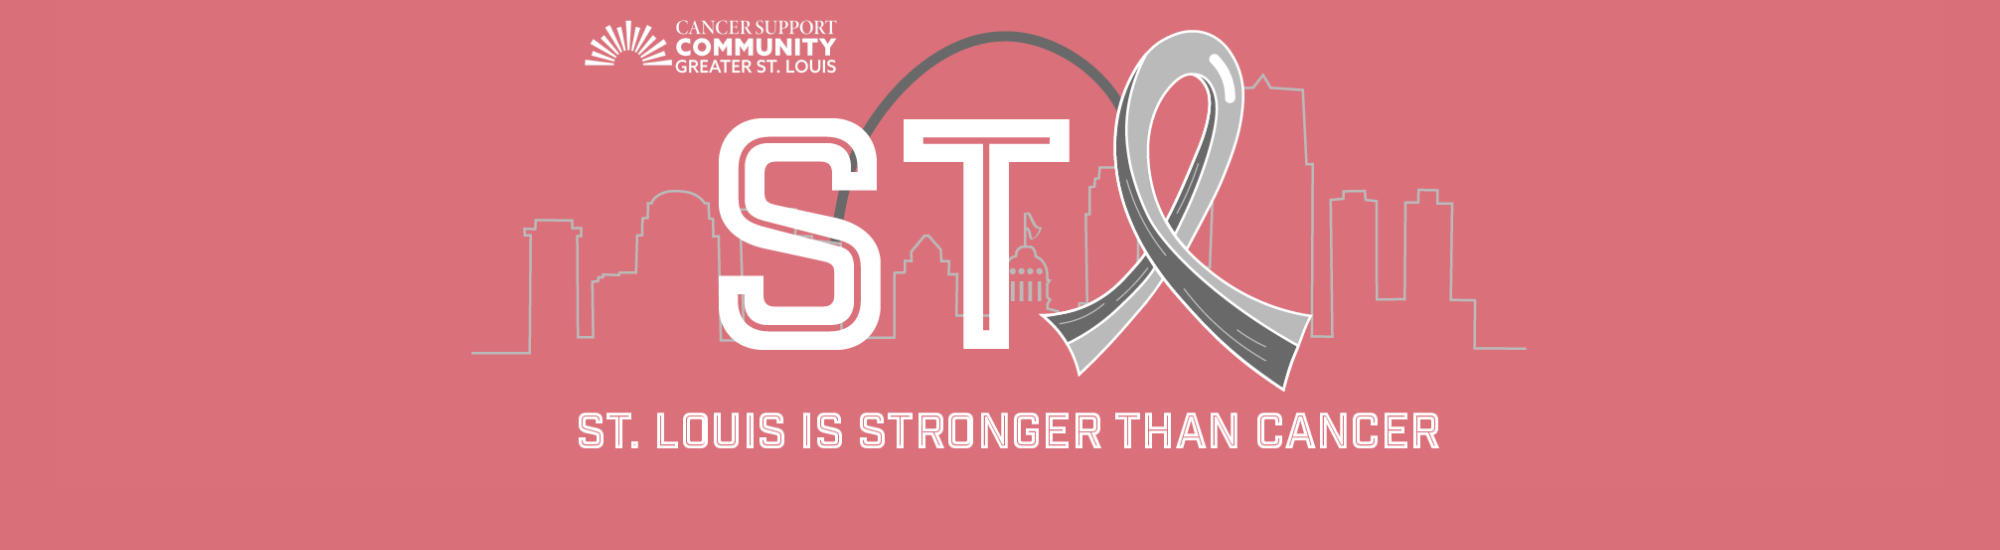 St. Louis is Stronger than Cancer